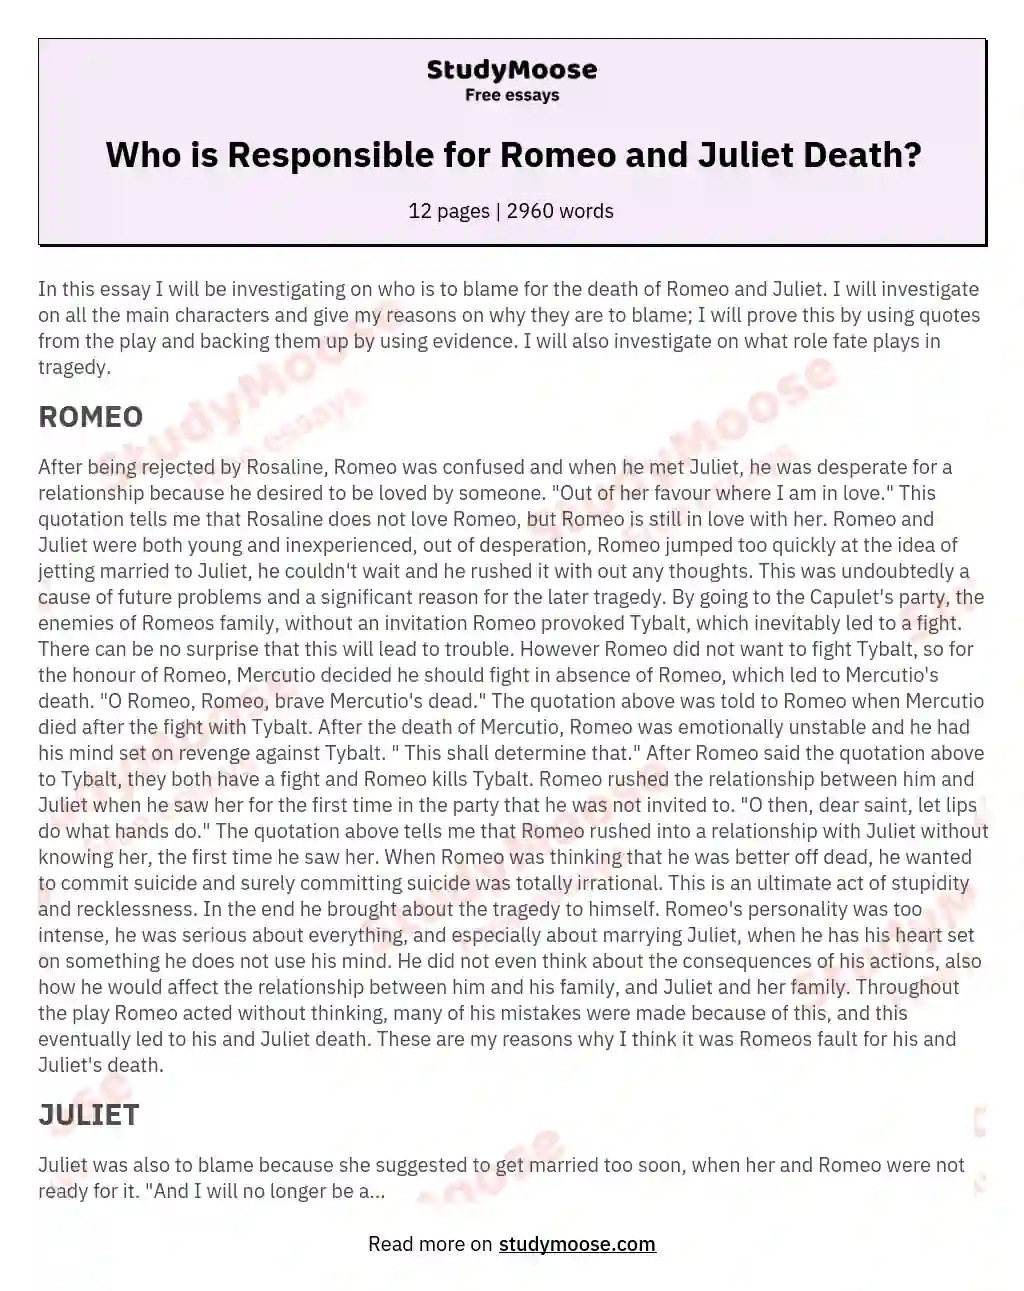 who is responsible for romeo and juliet's death essay